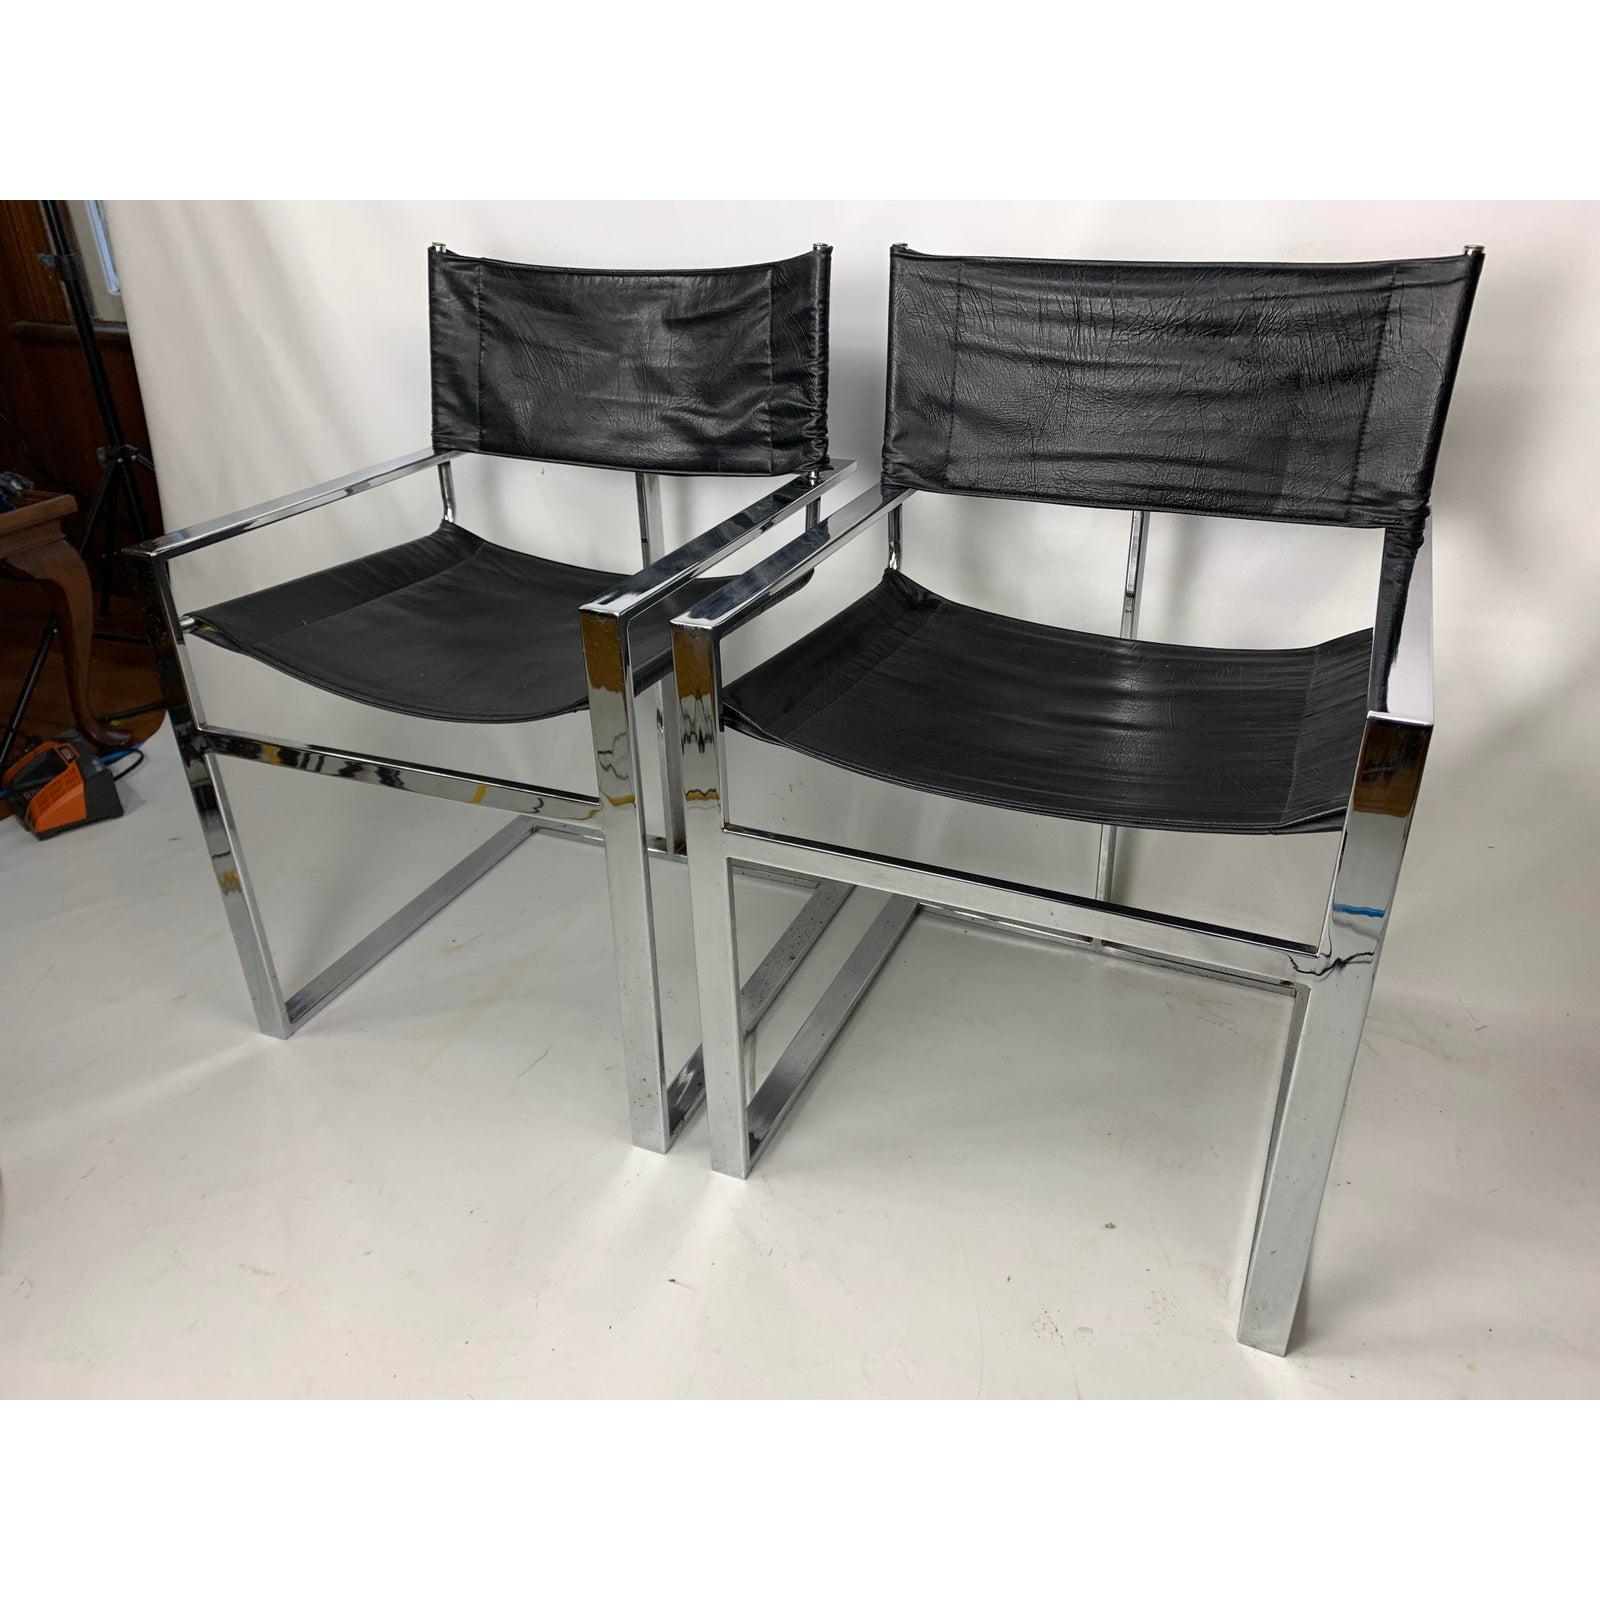 Vintage mid-century chrome & leather flat bar director style arm chairs - a pair.